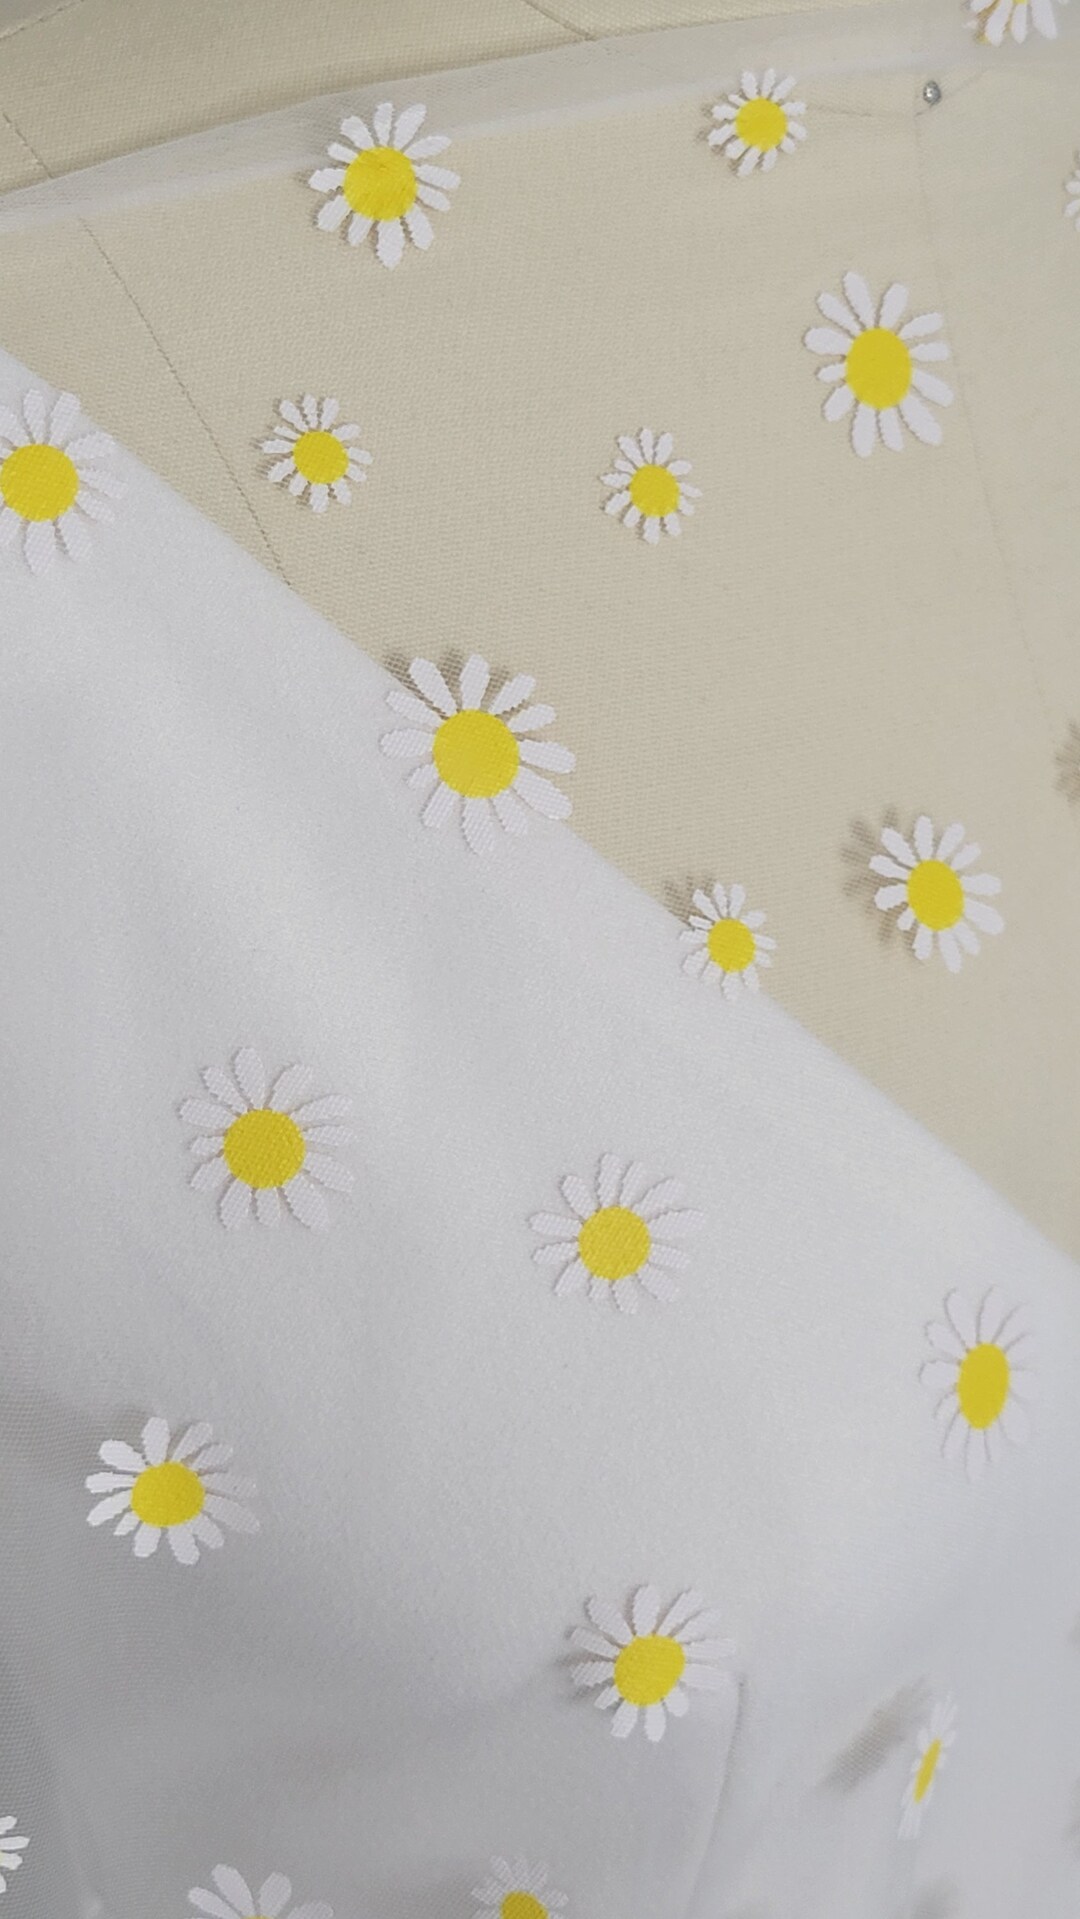 Daisy Flower Mesh Tulle Fabric Print Daisy Mesh Fabric in off - Etsy